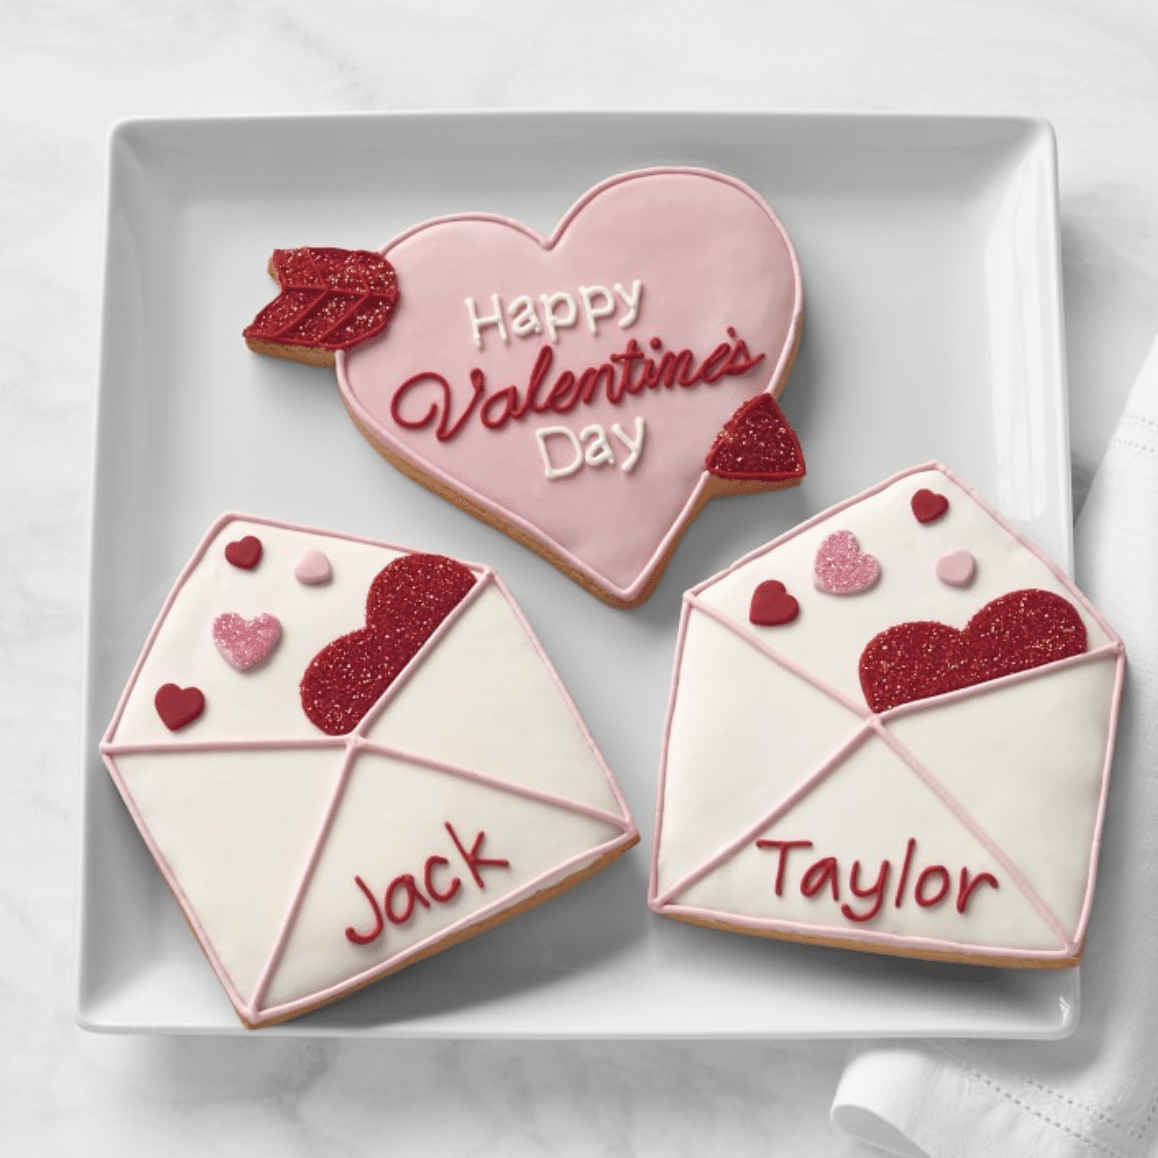 Customized Valentine's Day Cookies from Williams-Sonoma.  Valentine's Day gift ideas | 